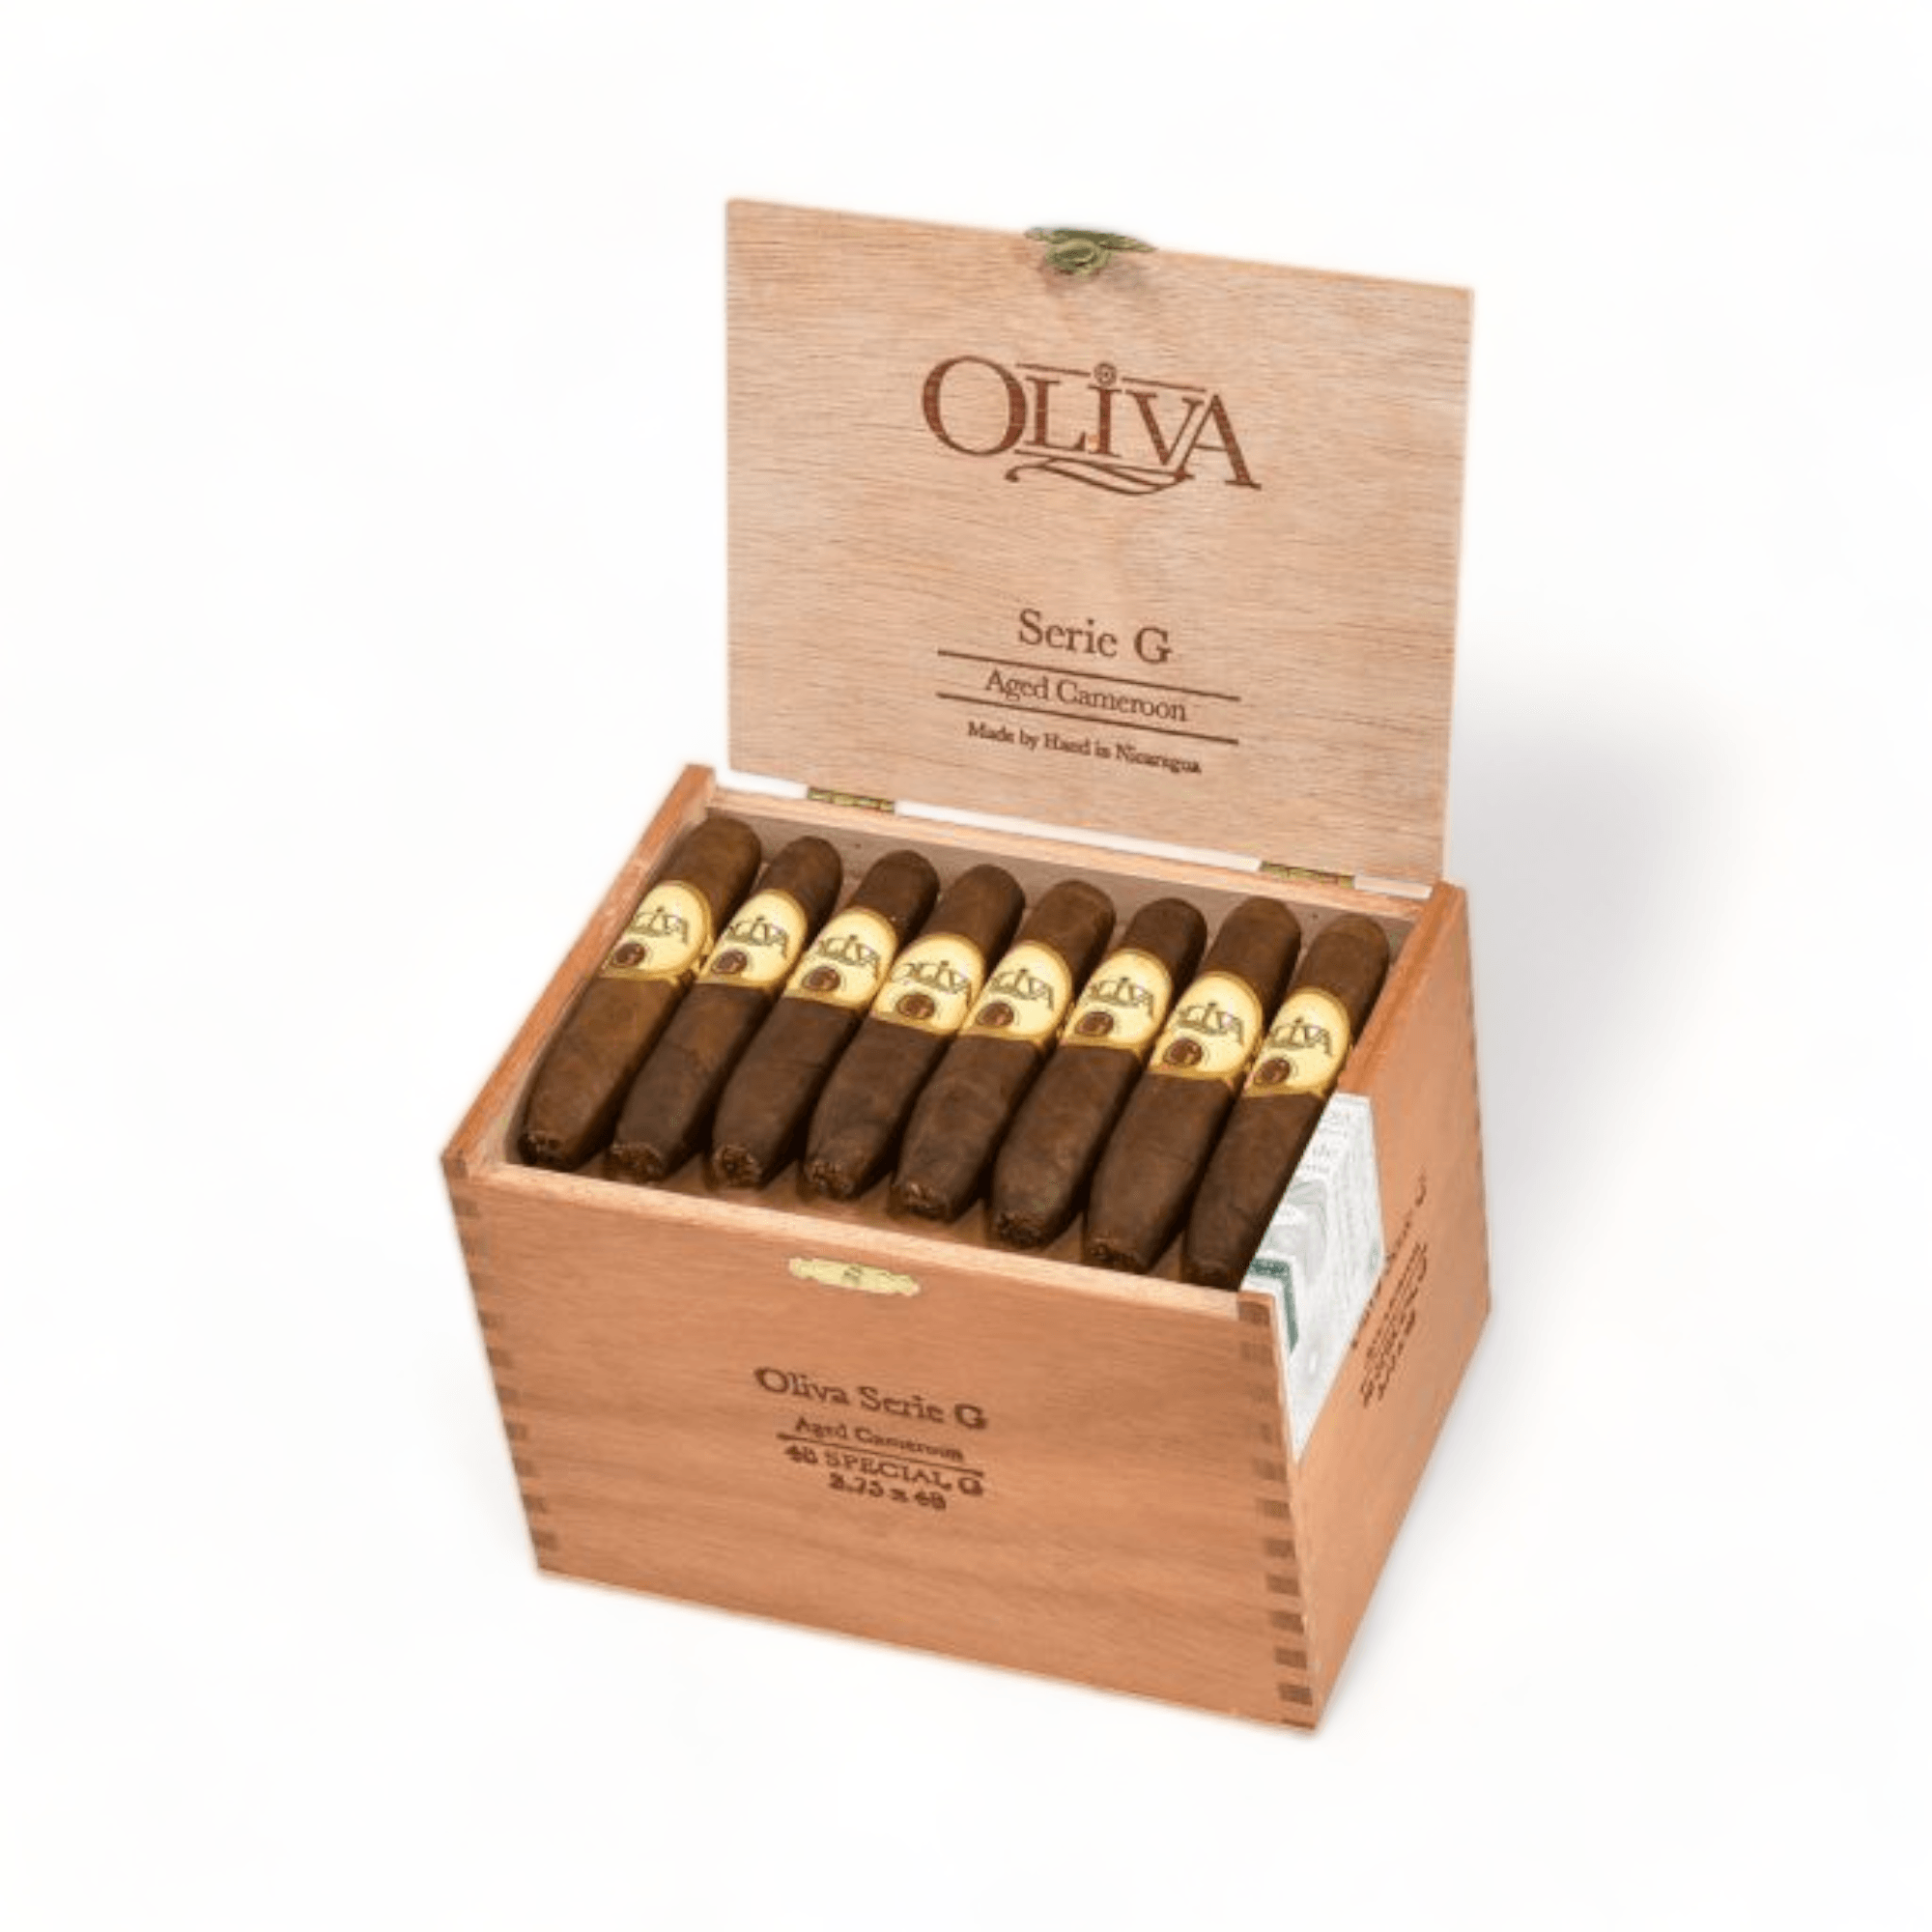 Oliva Serie G Aged Cameroon Special G 3.75 X 48 Box 25 - hk.cohcigars